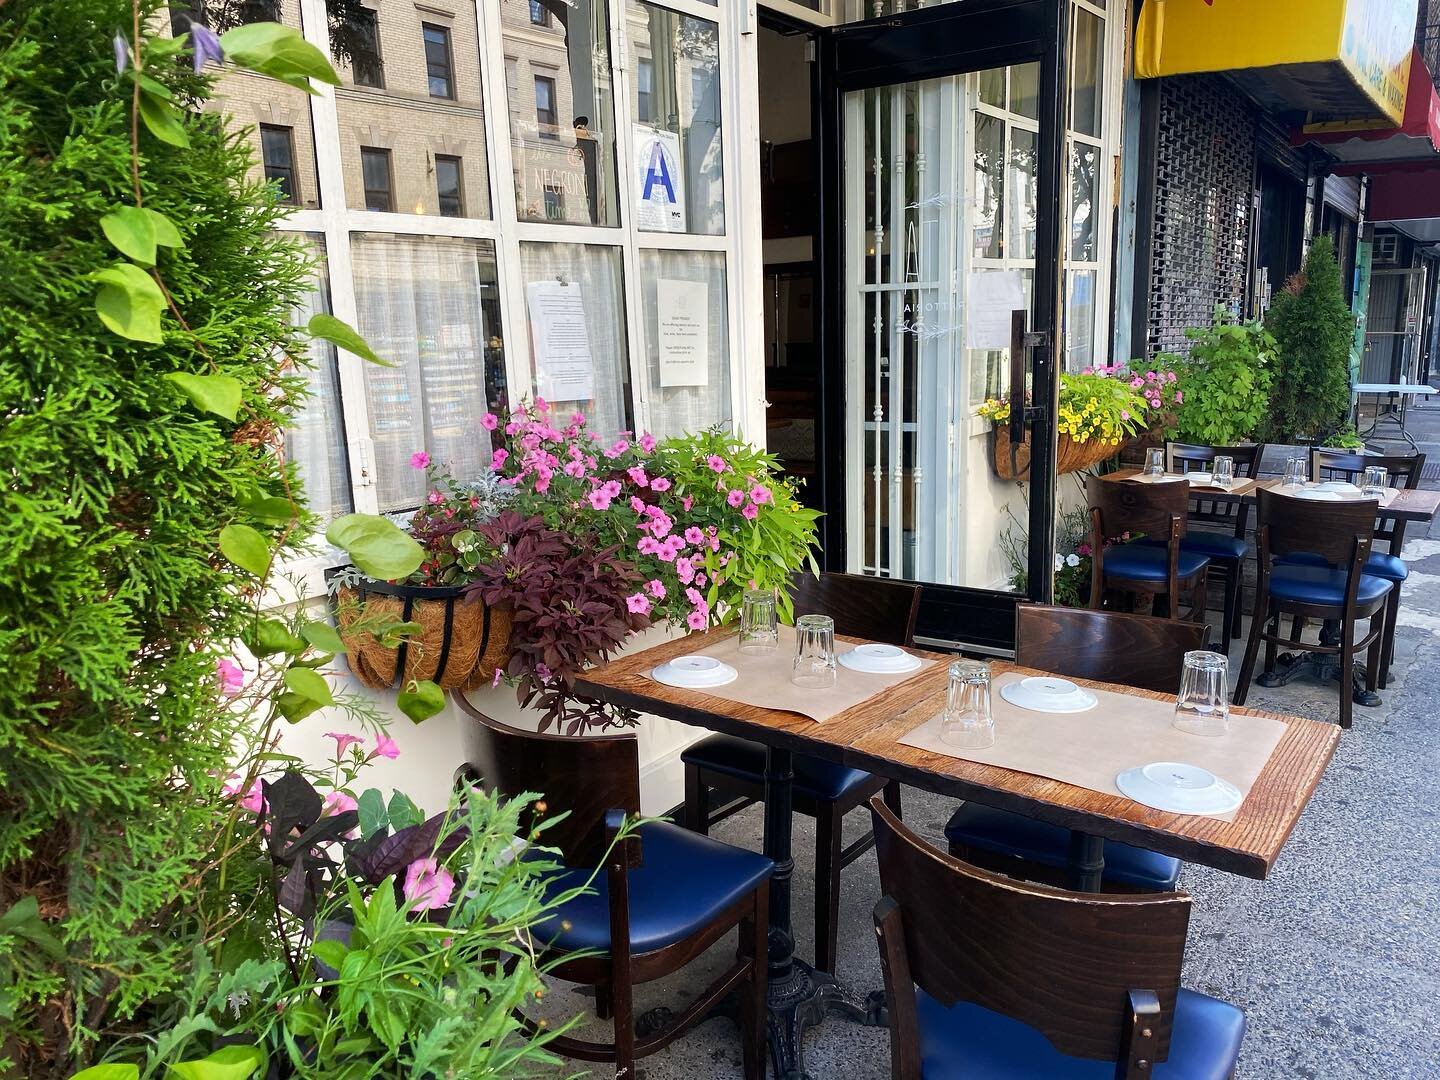 We are excited to welcome you back for outdoor dining!🌸
Let&rsquo;s be safe and enjoy this summer together. We are taking all necessary precautions to ensure our guests feel safe and comfortable. Book your reservation on Resy!

⠀ ⠀

#goodtobeback #o